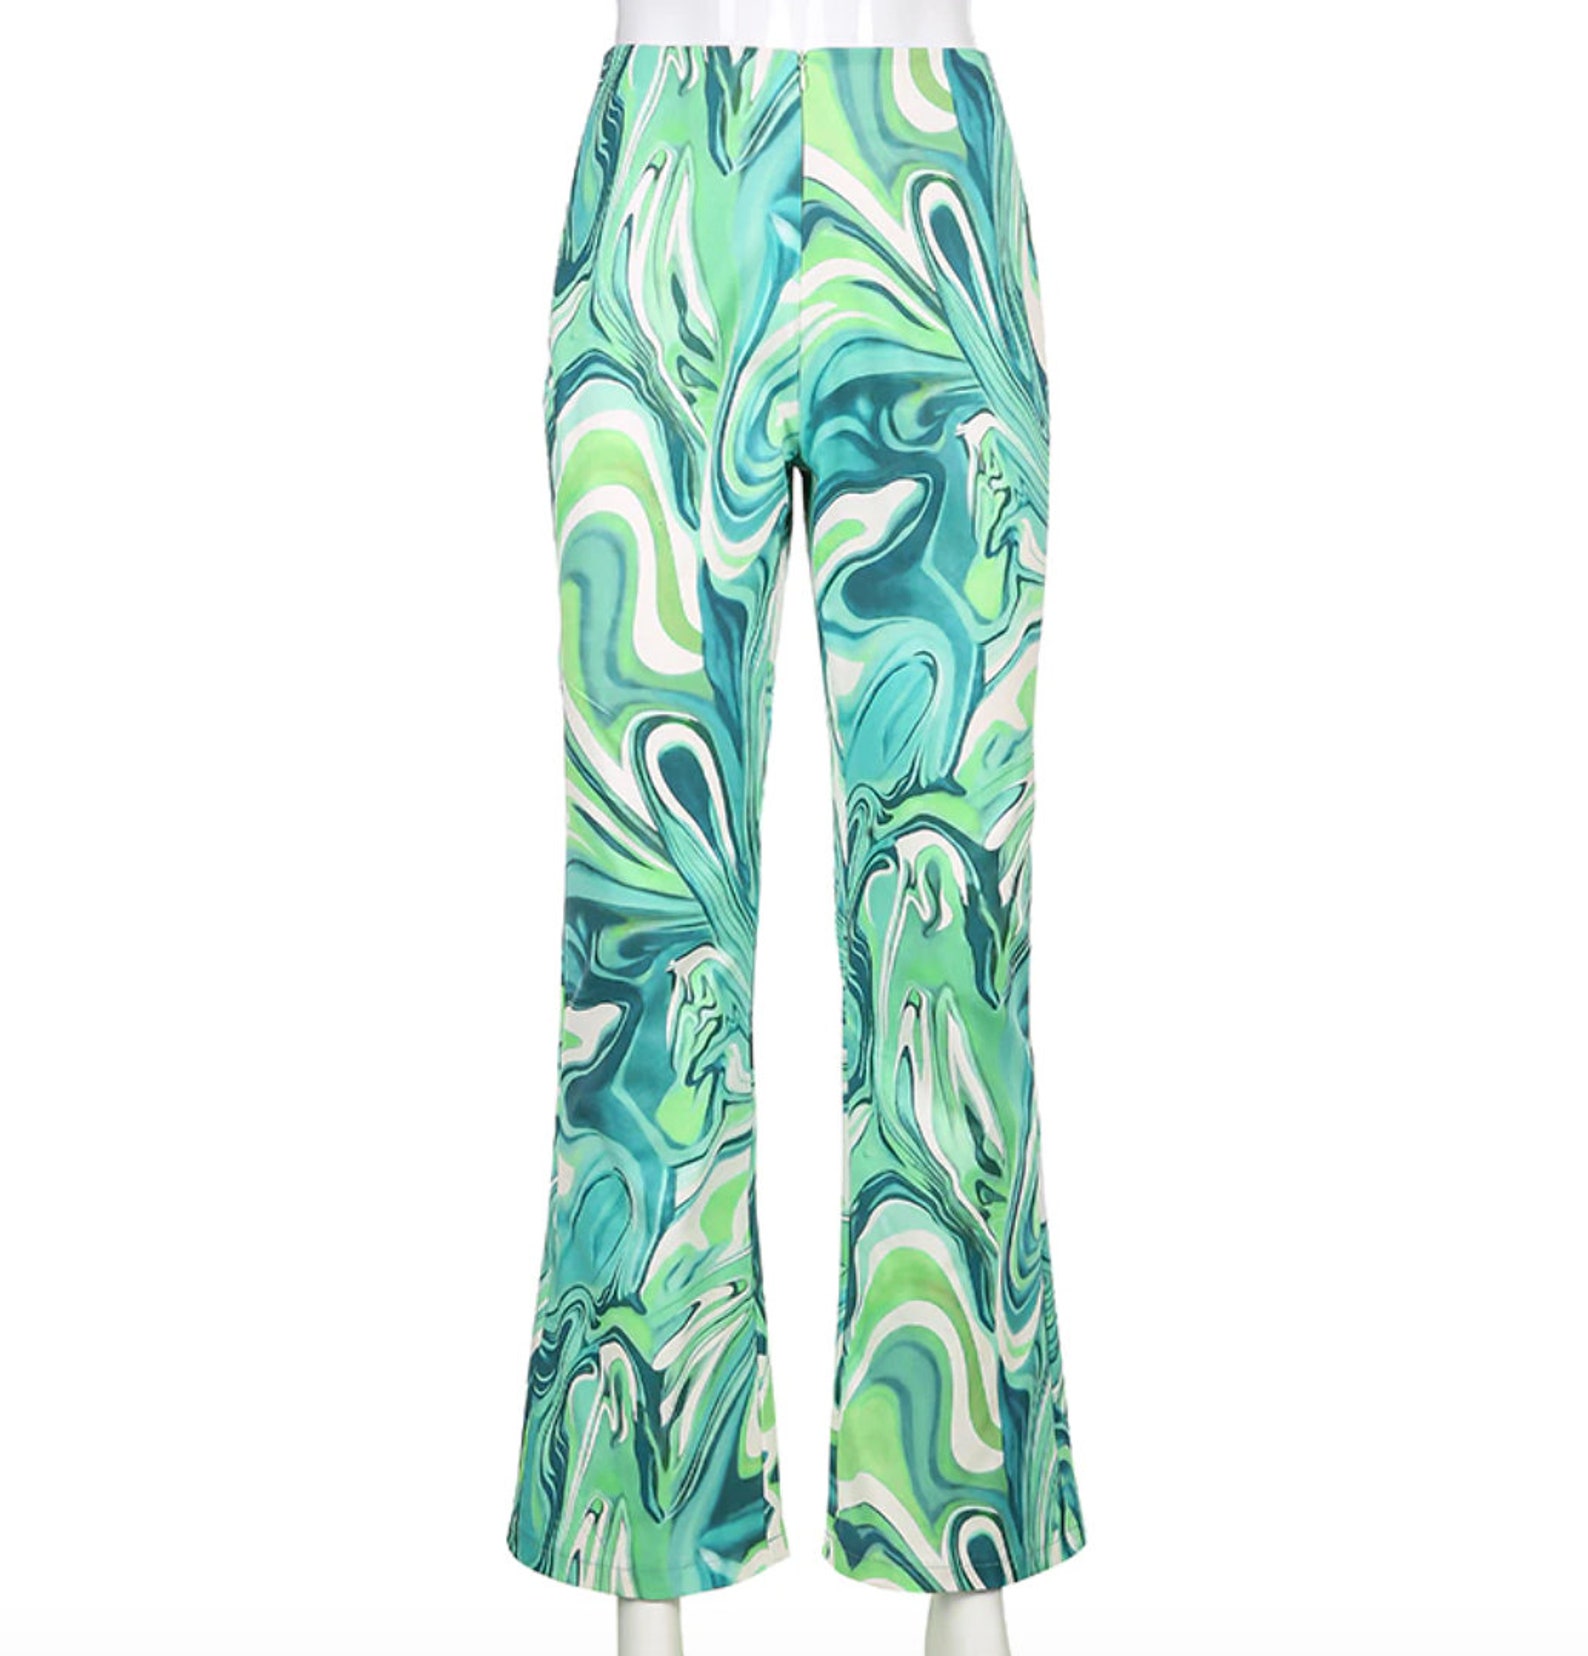 Green SWIRL PRINT PANTS gifts for her aesthetic y2k trousers | Etsy